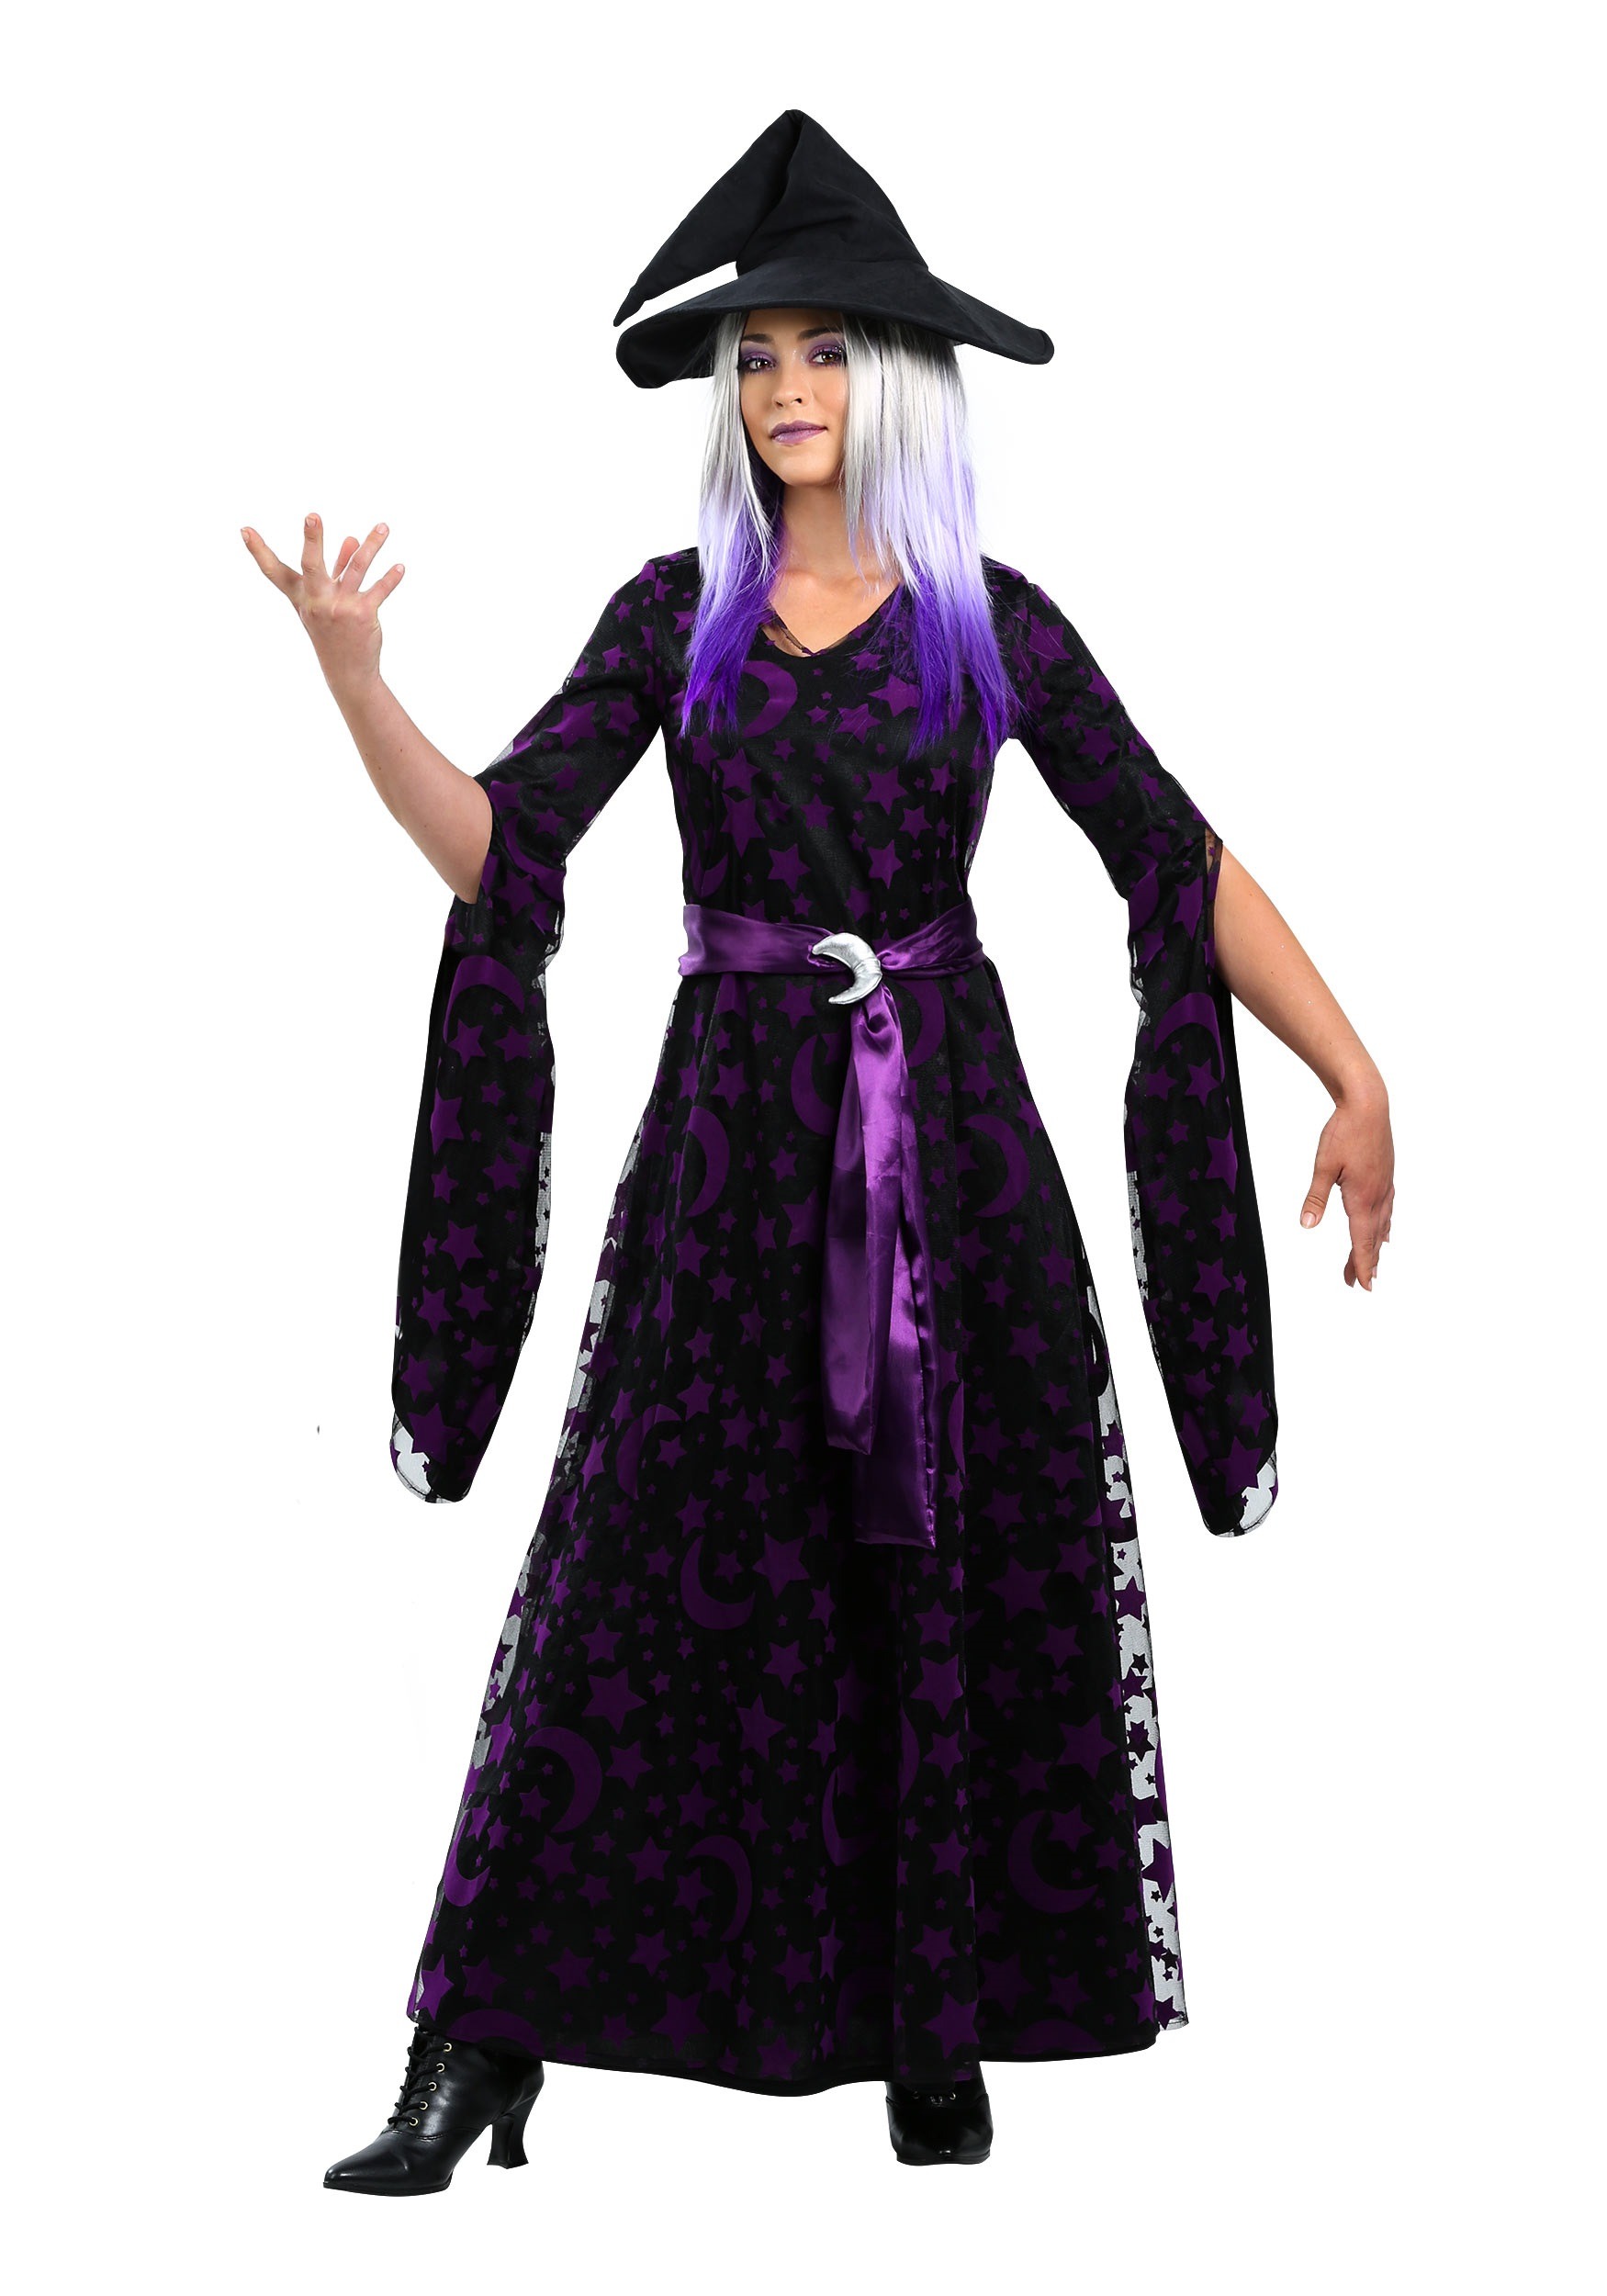 Photos - Fancy Dress MOON FUN Costumes Purple  Witch  Costume for Women Black/Pur 